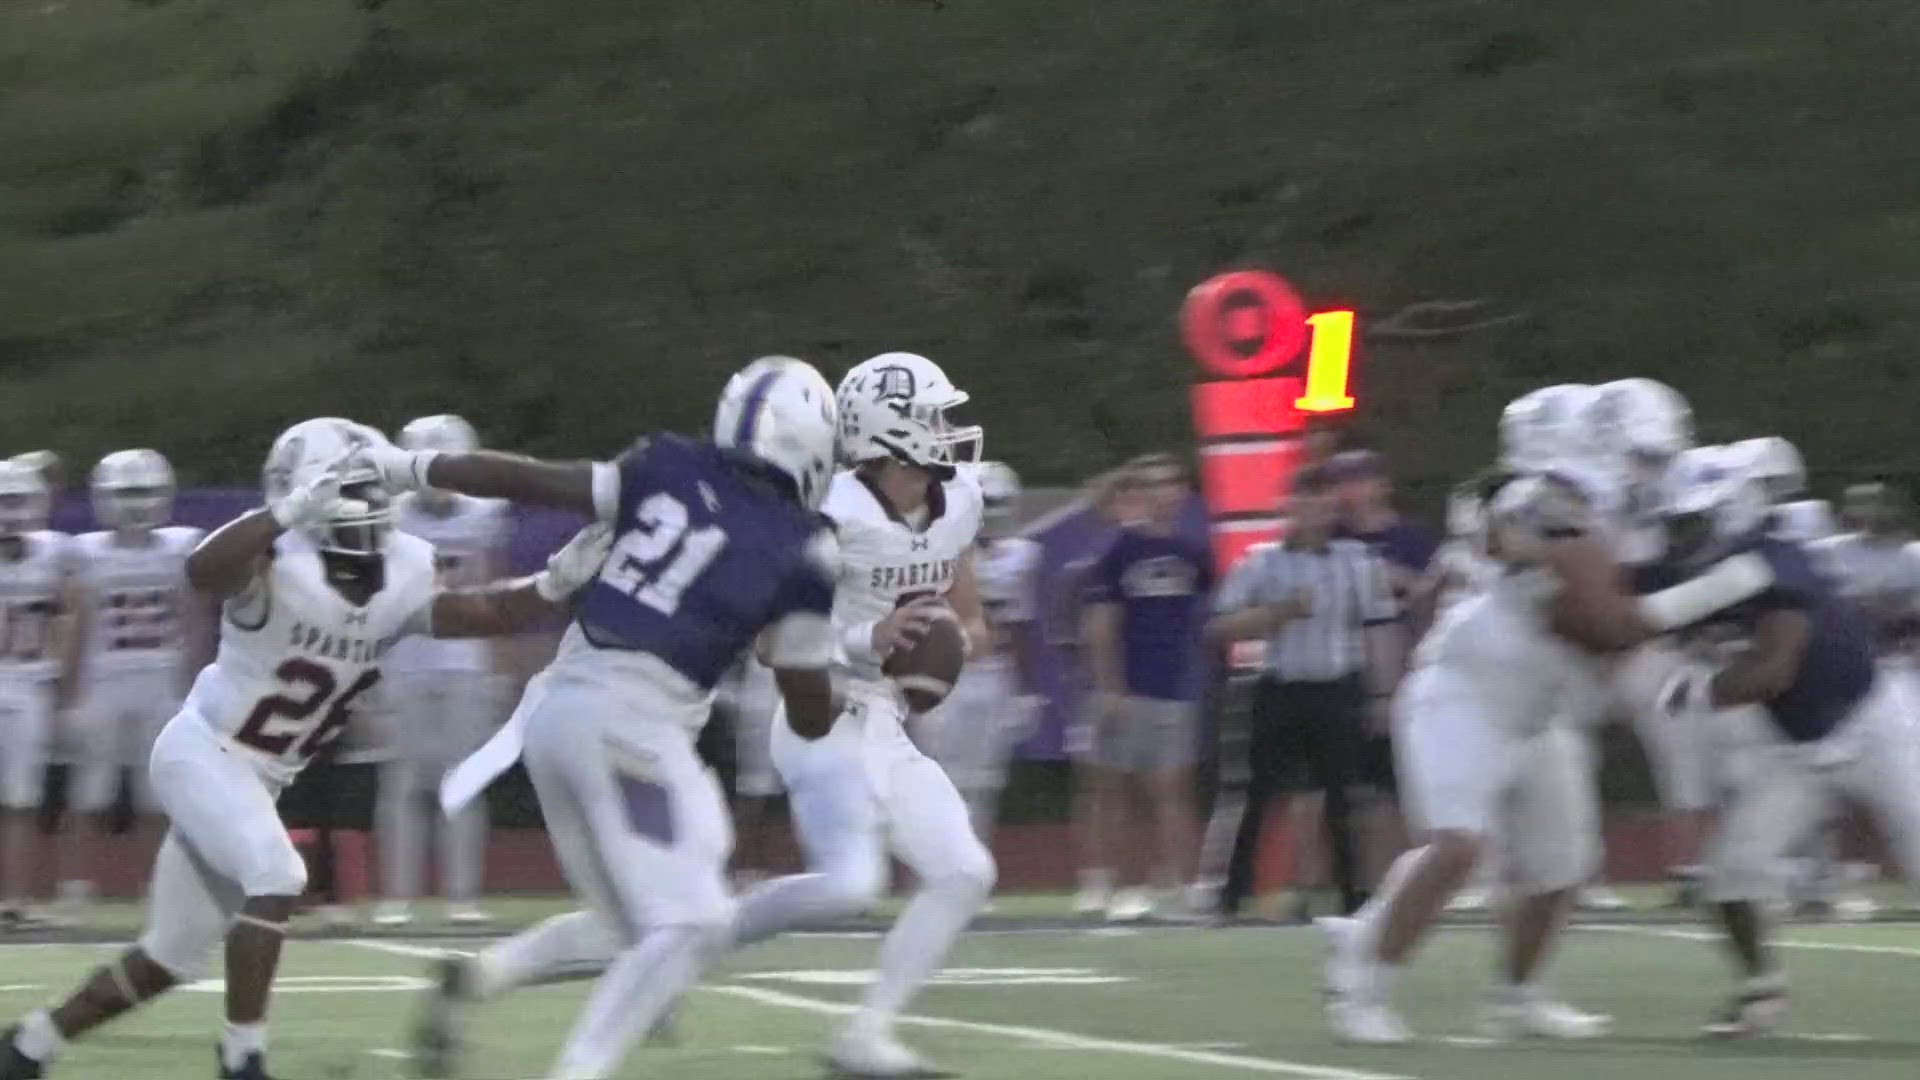 5 On Your Sideline returns for Week 5 of high school football. Here are the best highlights from the St. Louis area on Friday, Sept. 22, 2023.